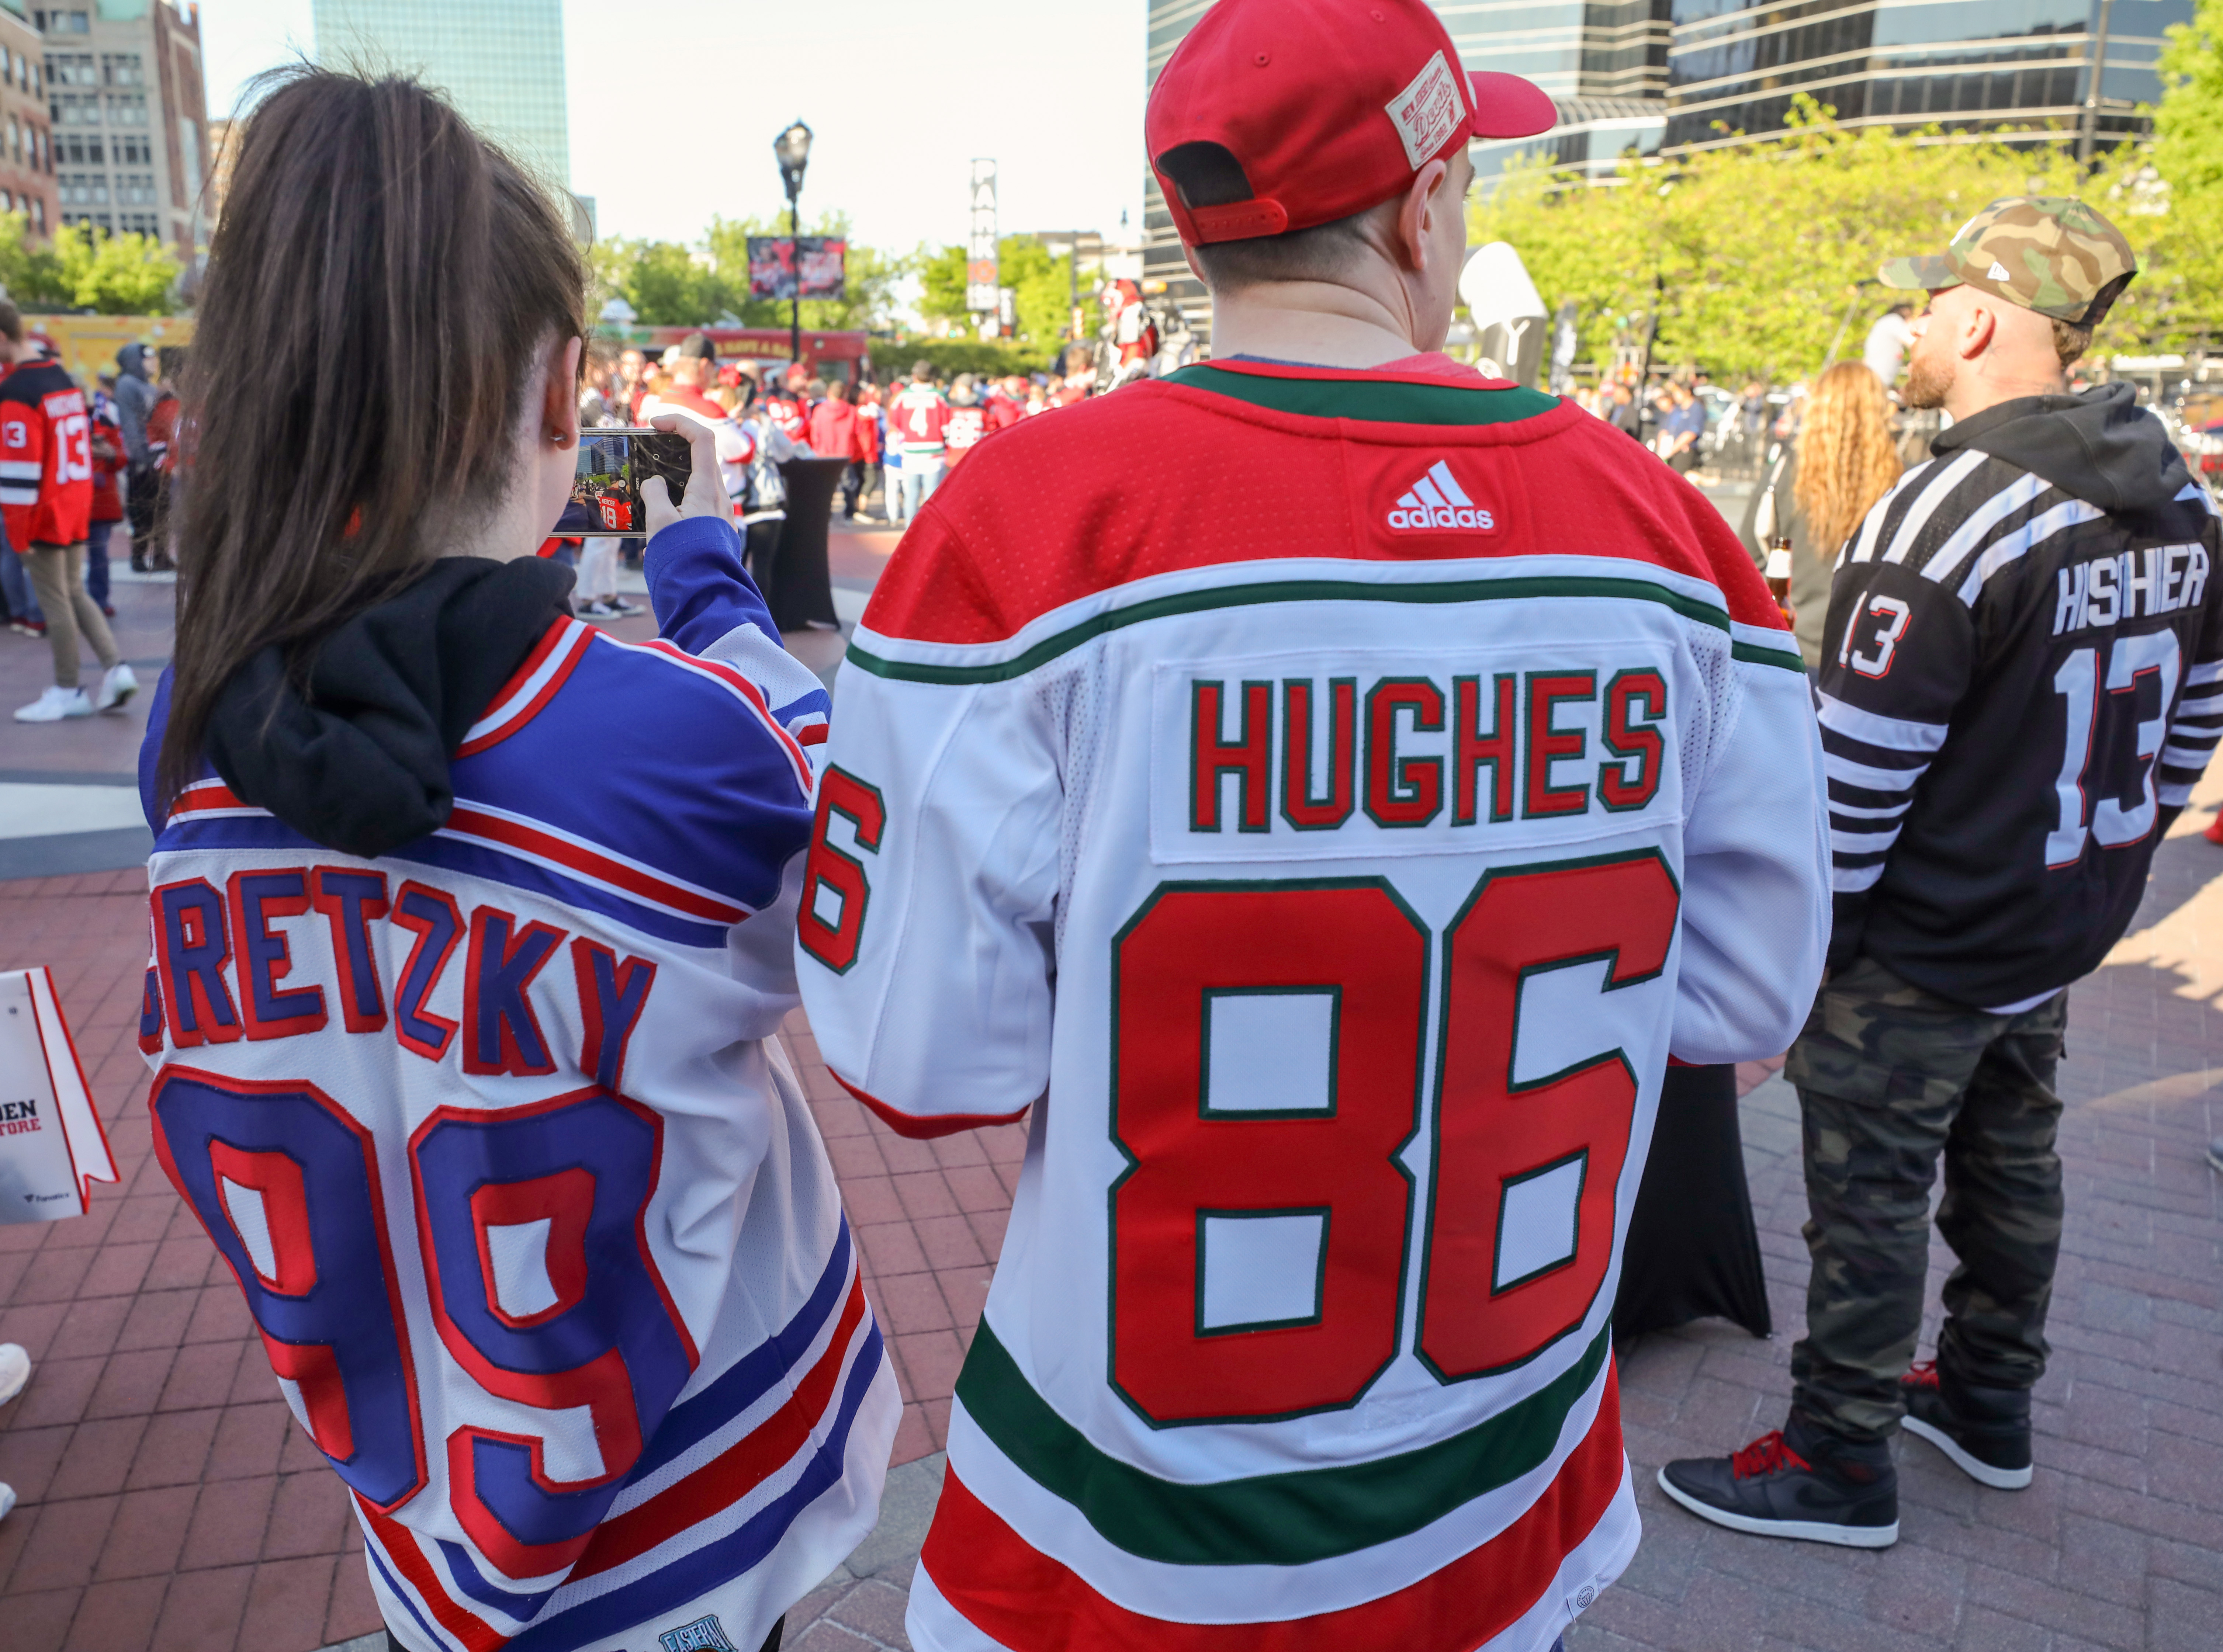 Sara Depaoli and Michael Cinnante of Newburgh, NY are wearing Wayne Gretzky and Jack Hughes jerseys outside Prudential Center on Tuesday, April 18, 2023 in Newark, N.J. The Devils lost to the New York Rangers, 5-1, in Game 1 of the NHL Stanley Cup playoffs.